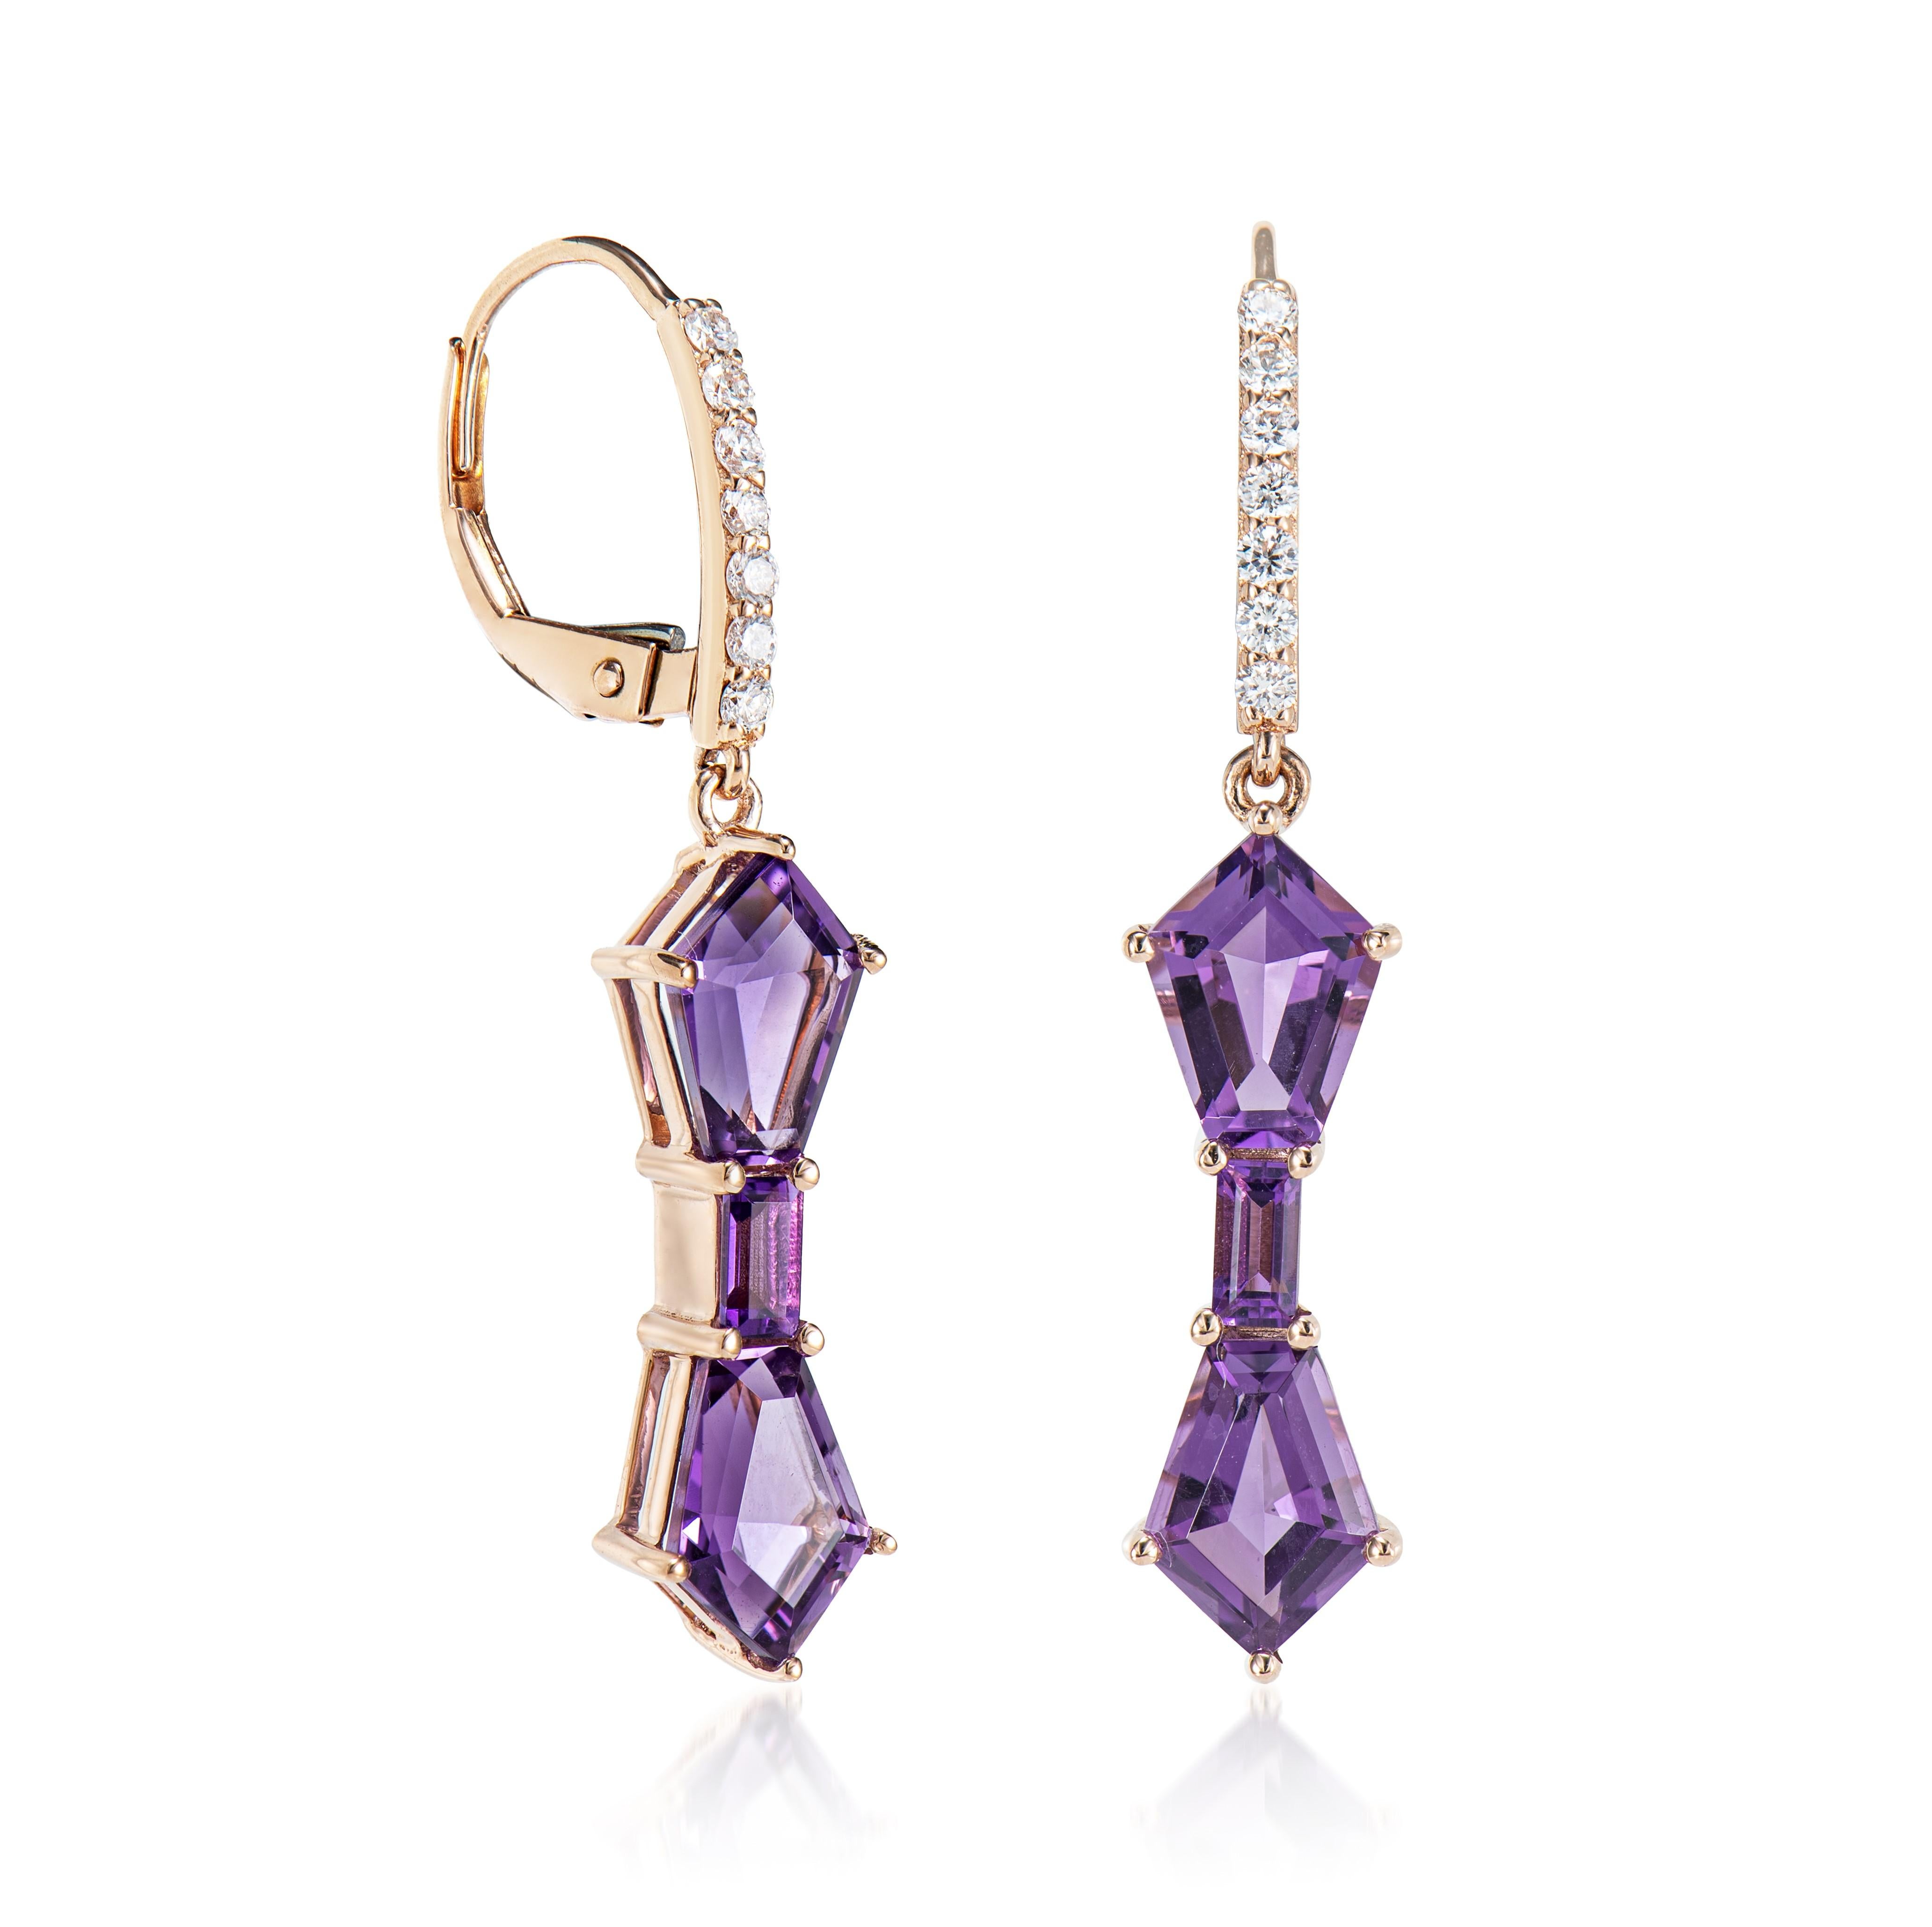 These are Fancy Amethyst Drop Earrings in NIB shape with purple hue. These rose gold drop earrings have a timeless, elegant appearance and can be worn on different occasions.

Amethyst Drop Earrings in 14Karat Rose Gold with White